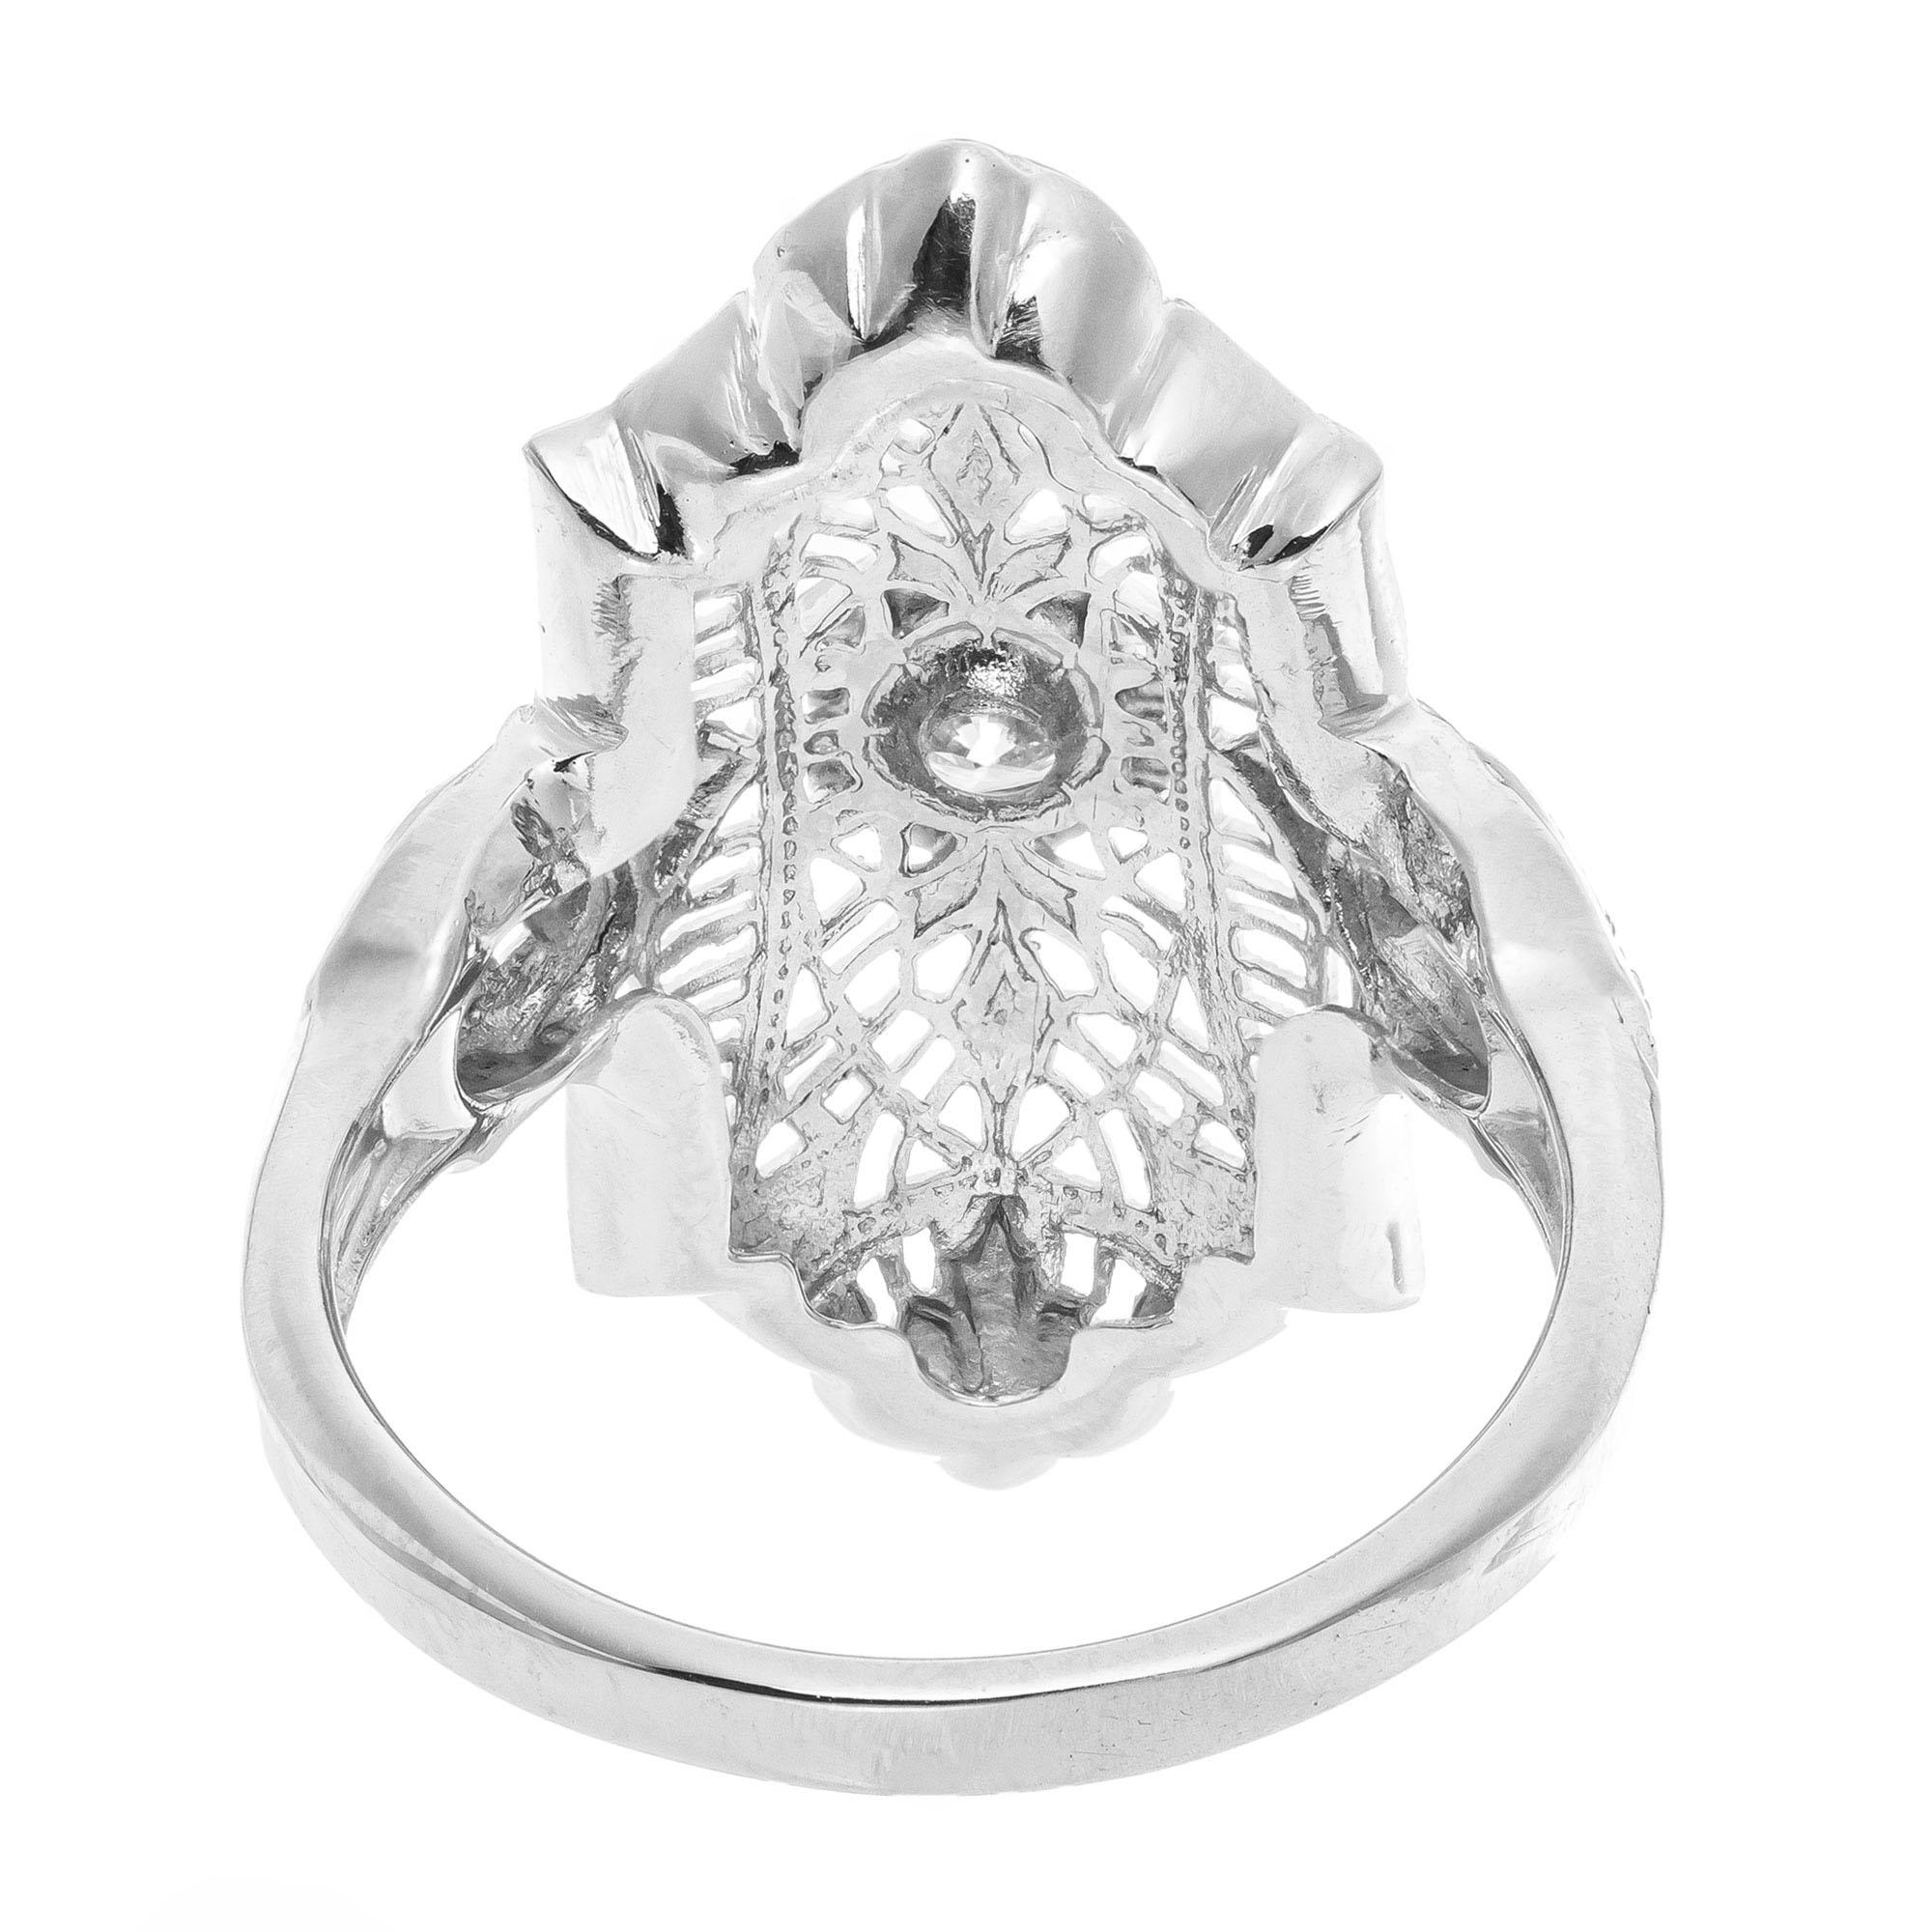 1940s 18 Carat Diamond White Gold Filigree Ring In Good Condition For Sale In Stamford, CT